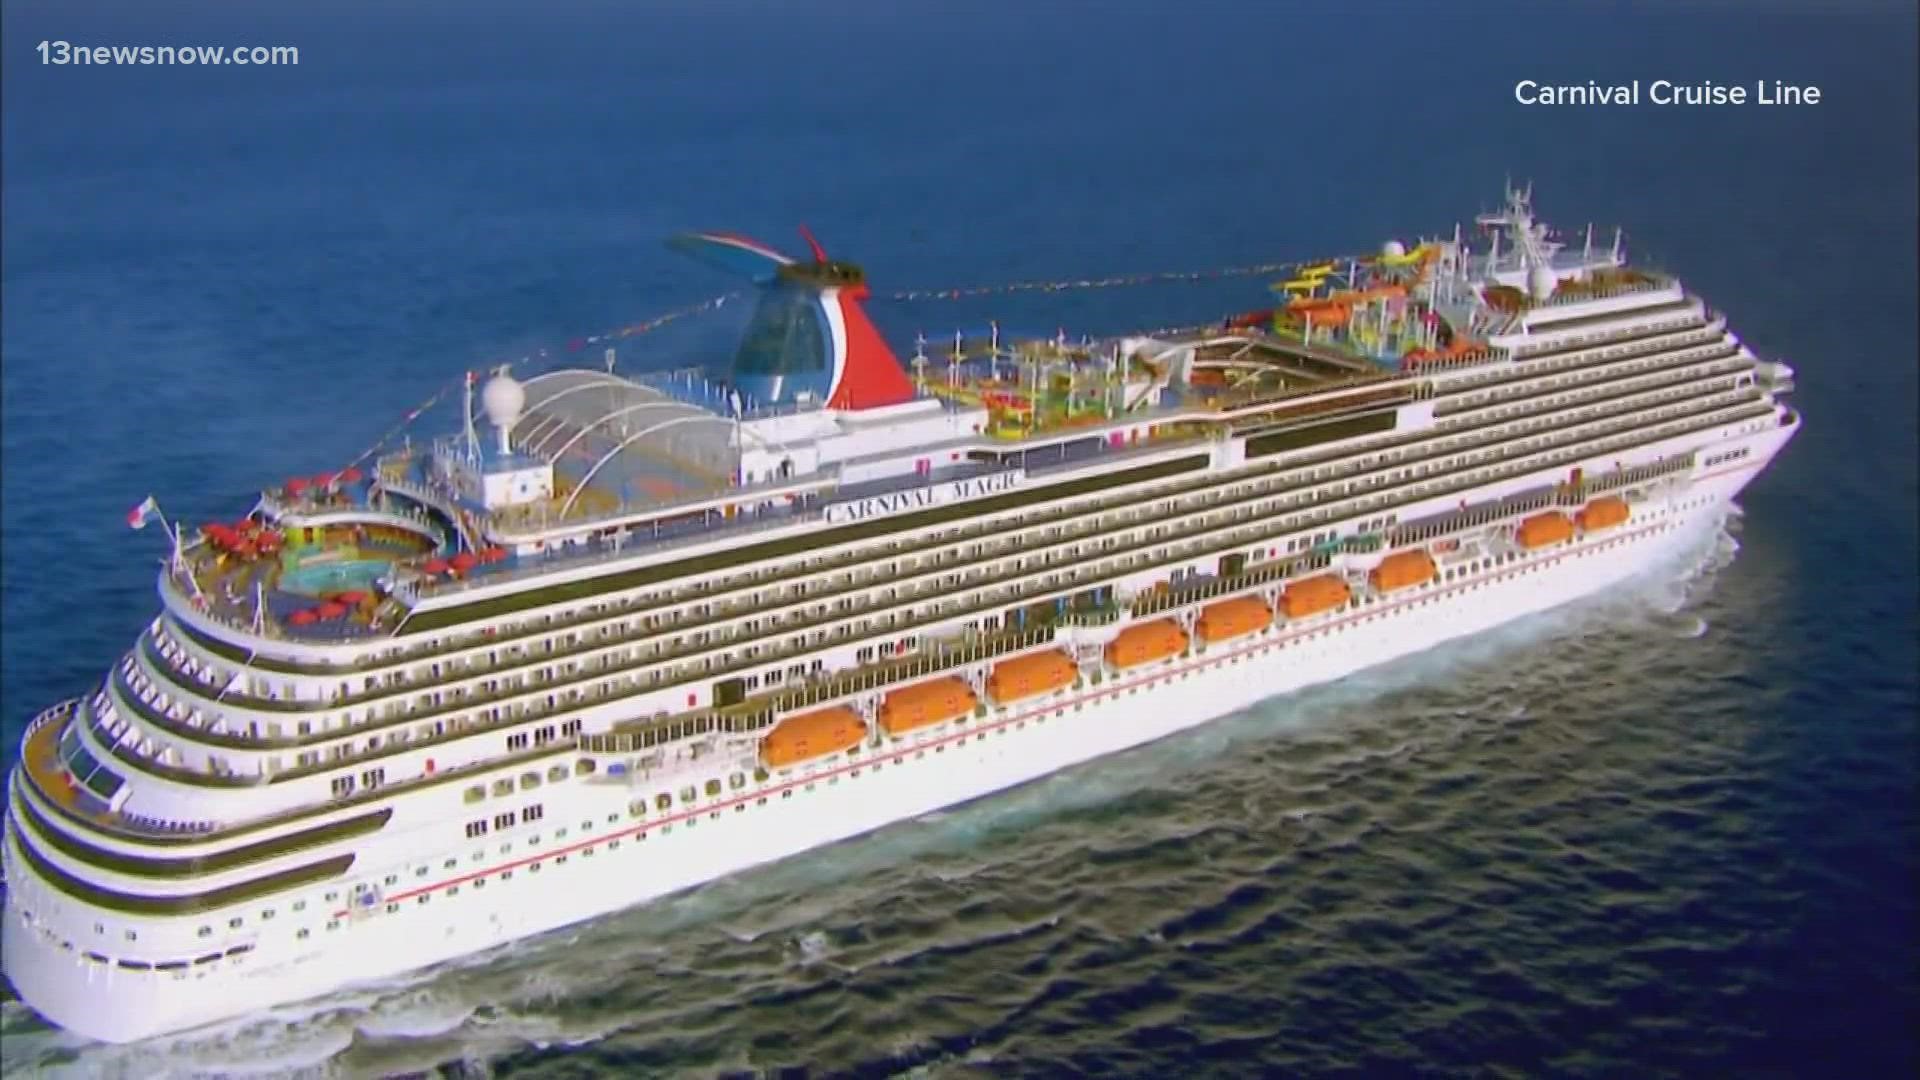 And the ship, which is named The Carnival Magic, certainly is massive. In fact, it's the largest cruise ship to ever sail out of Virginia.